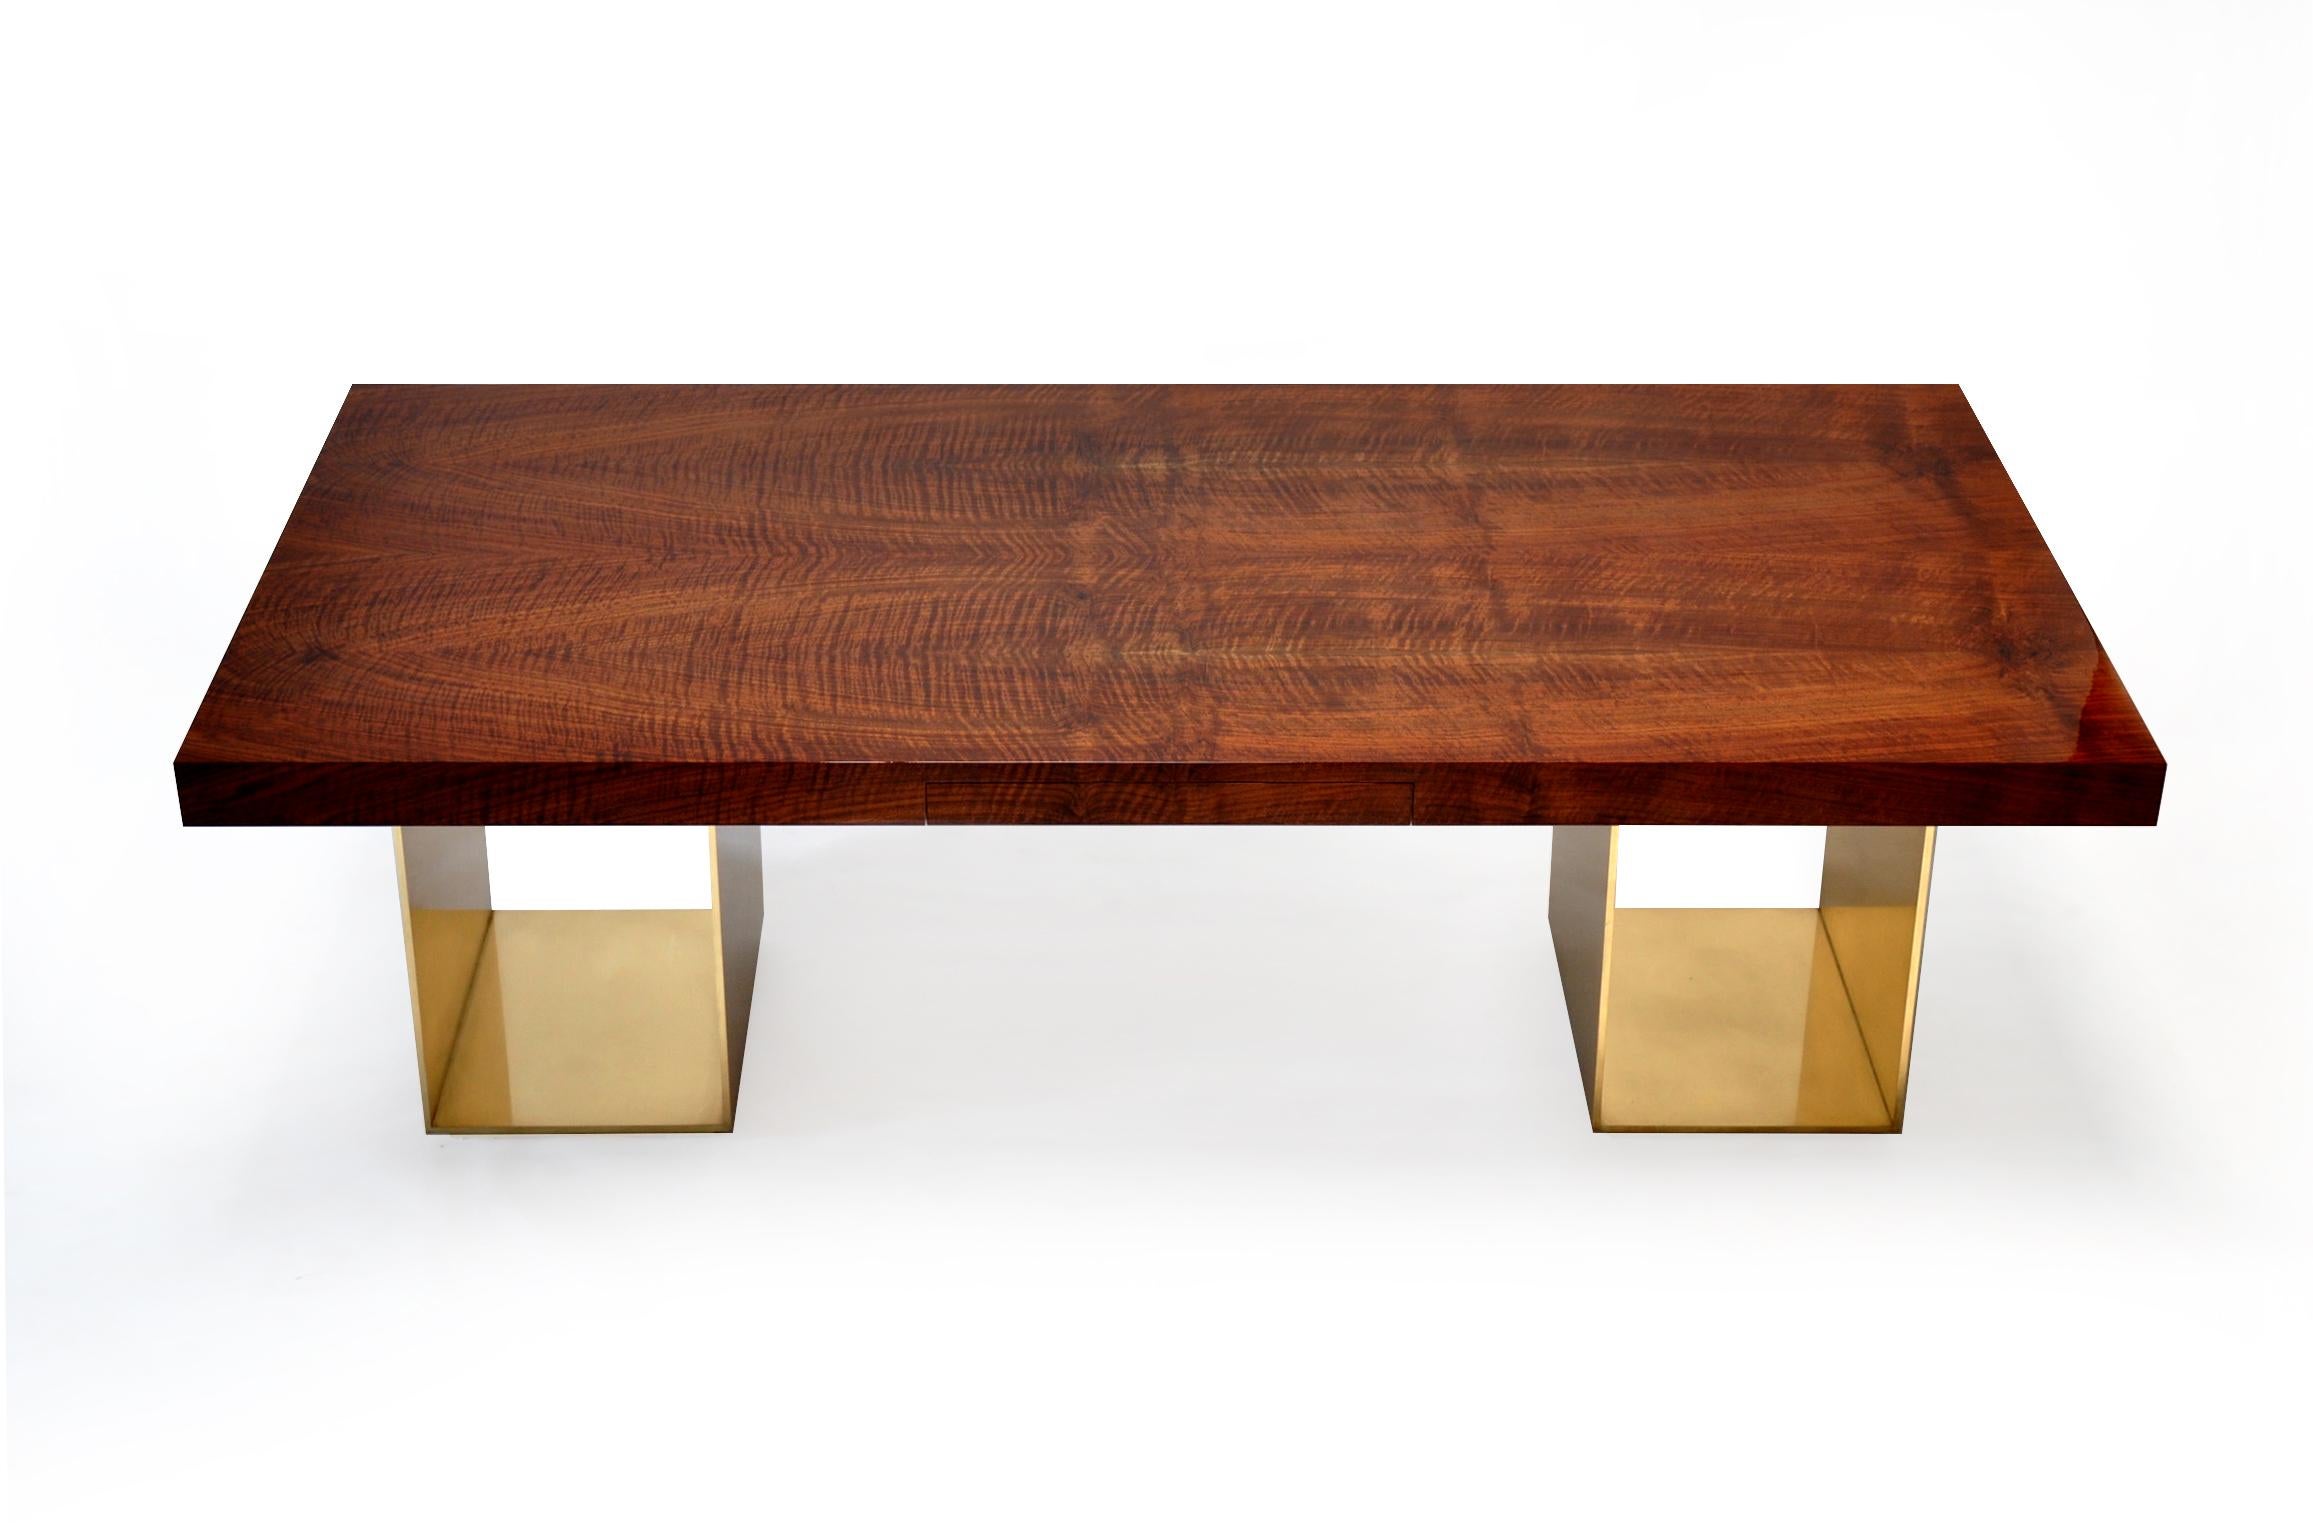 Beveled Bespoke Desk in Claro Walnut and Bronze By Newell Design Studio For Sale